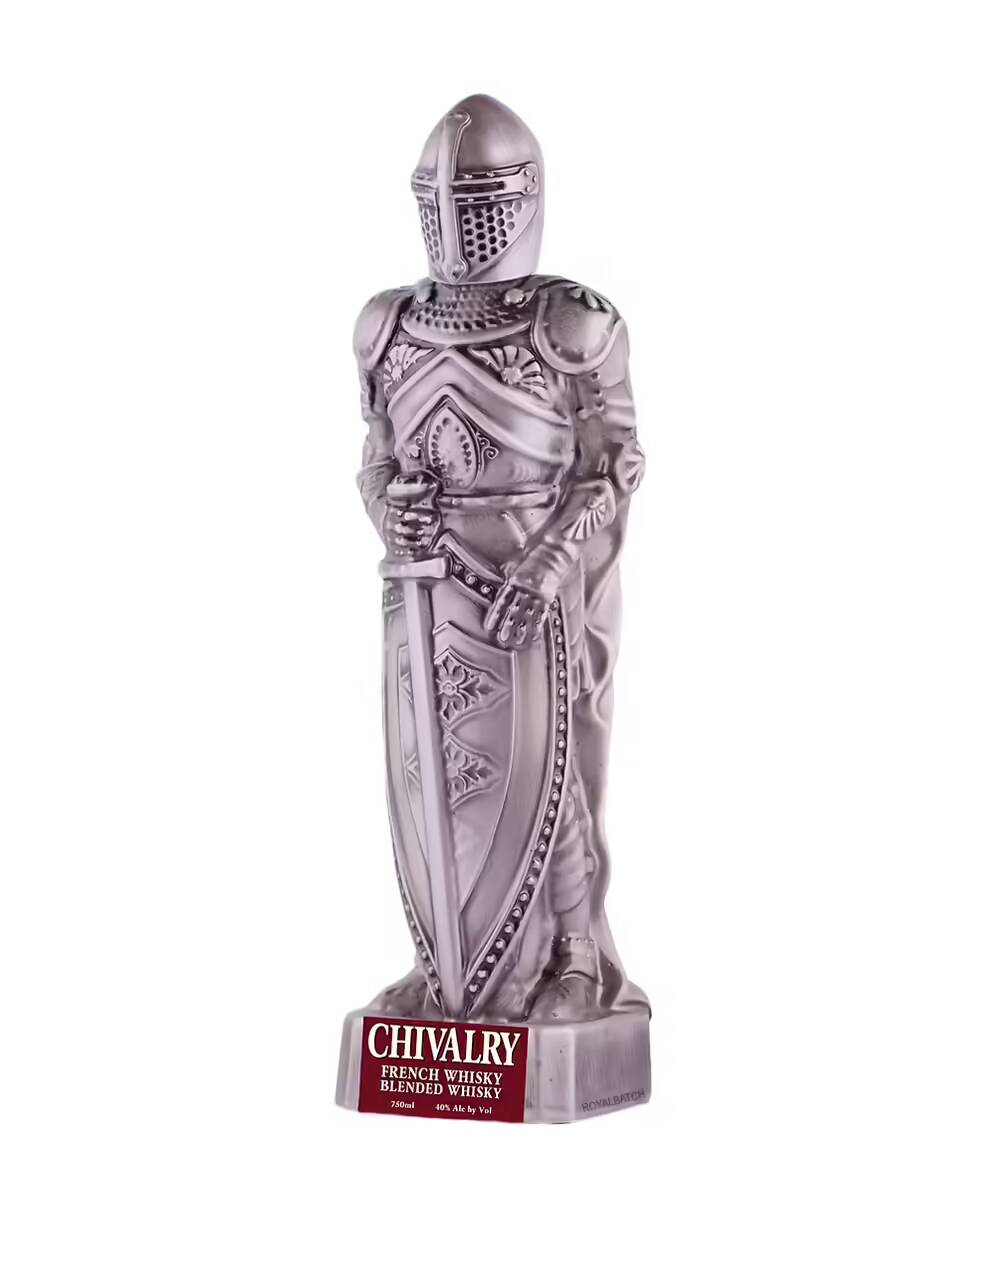 Chivalry Single Barrel French Whisky